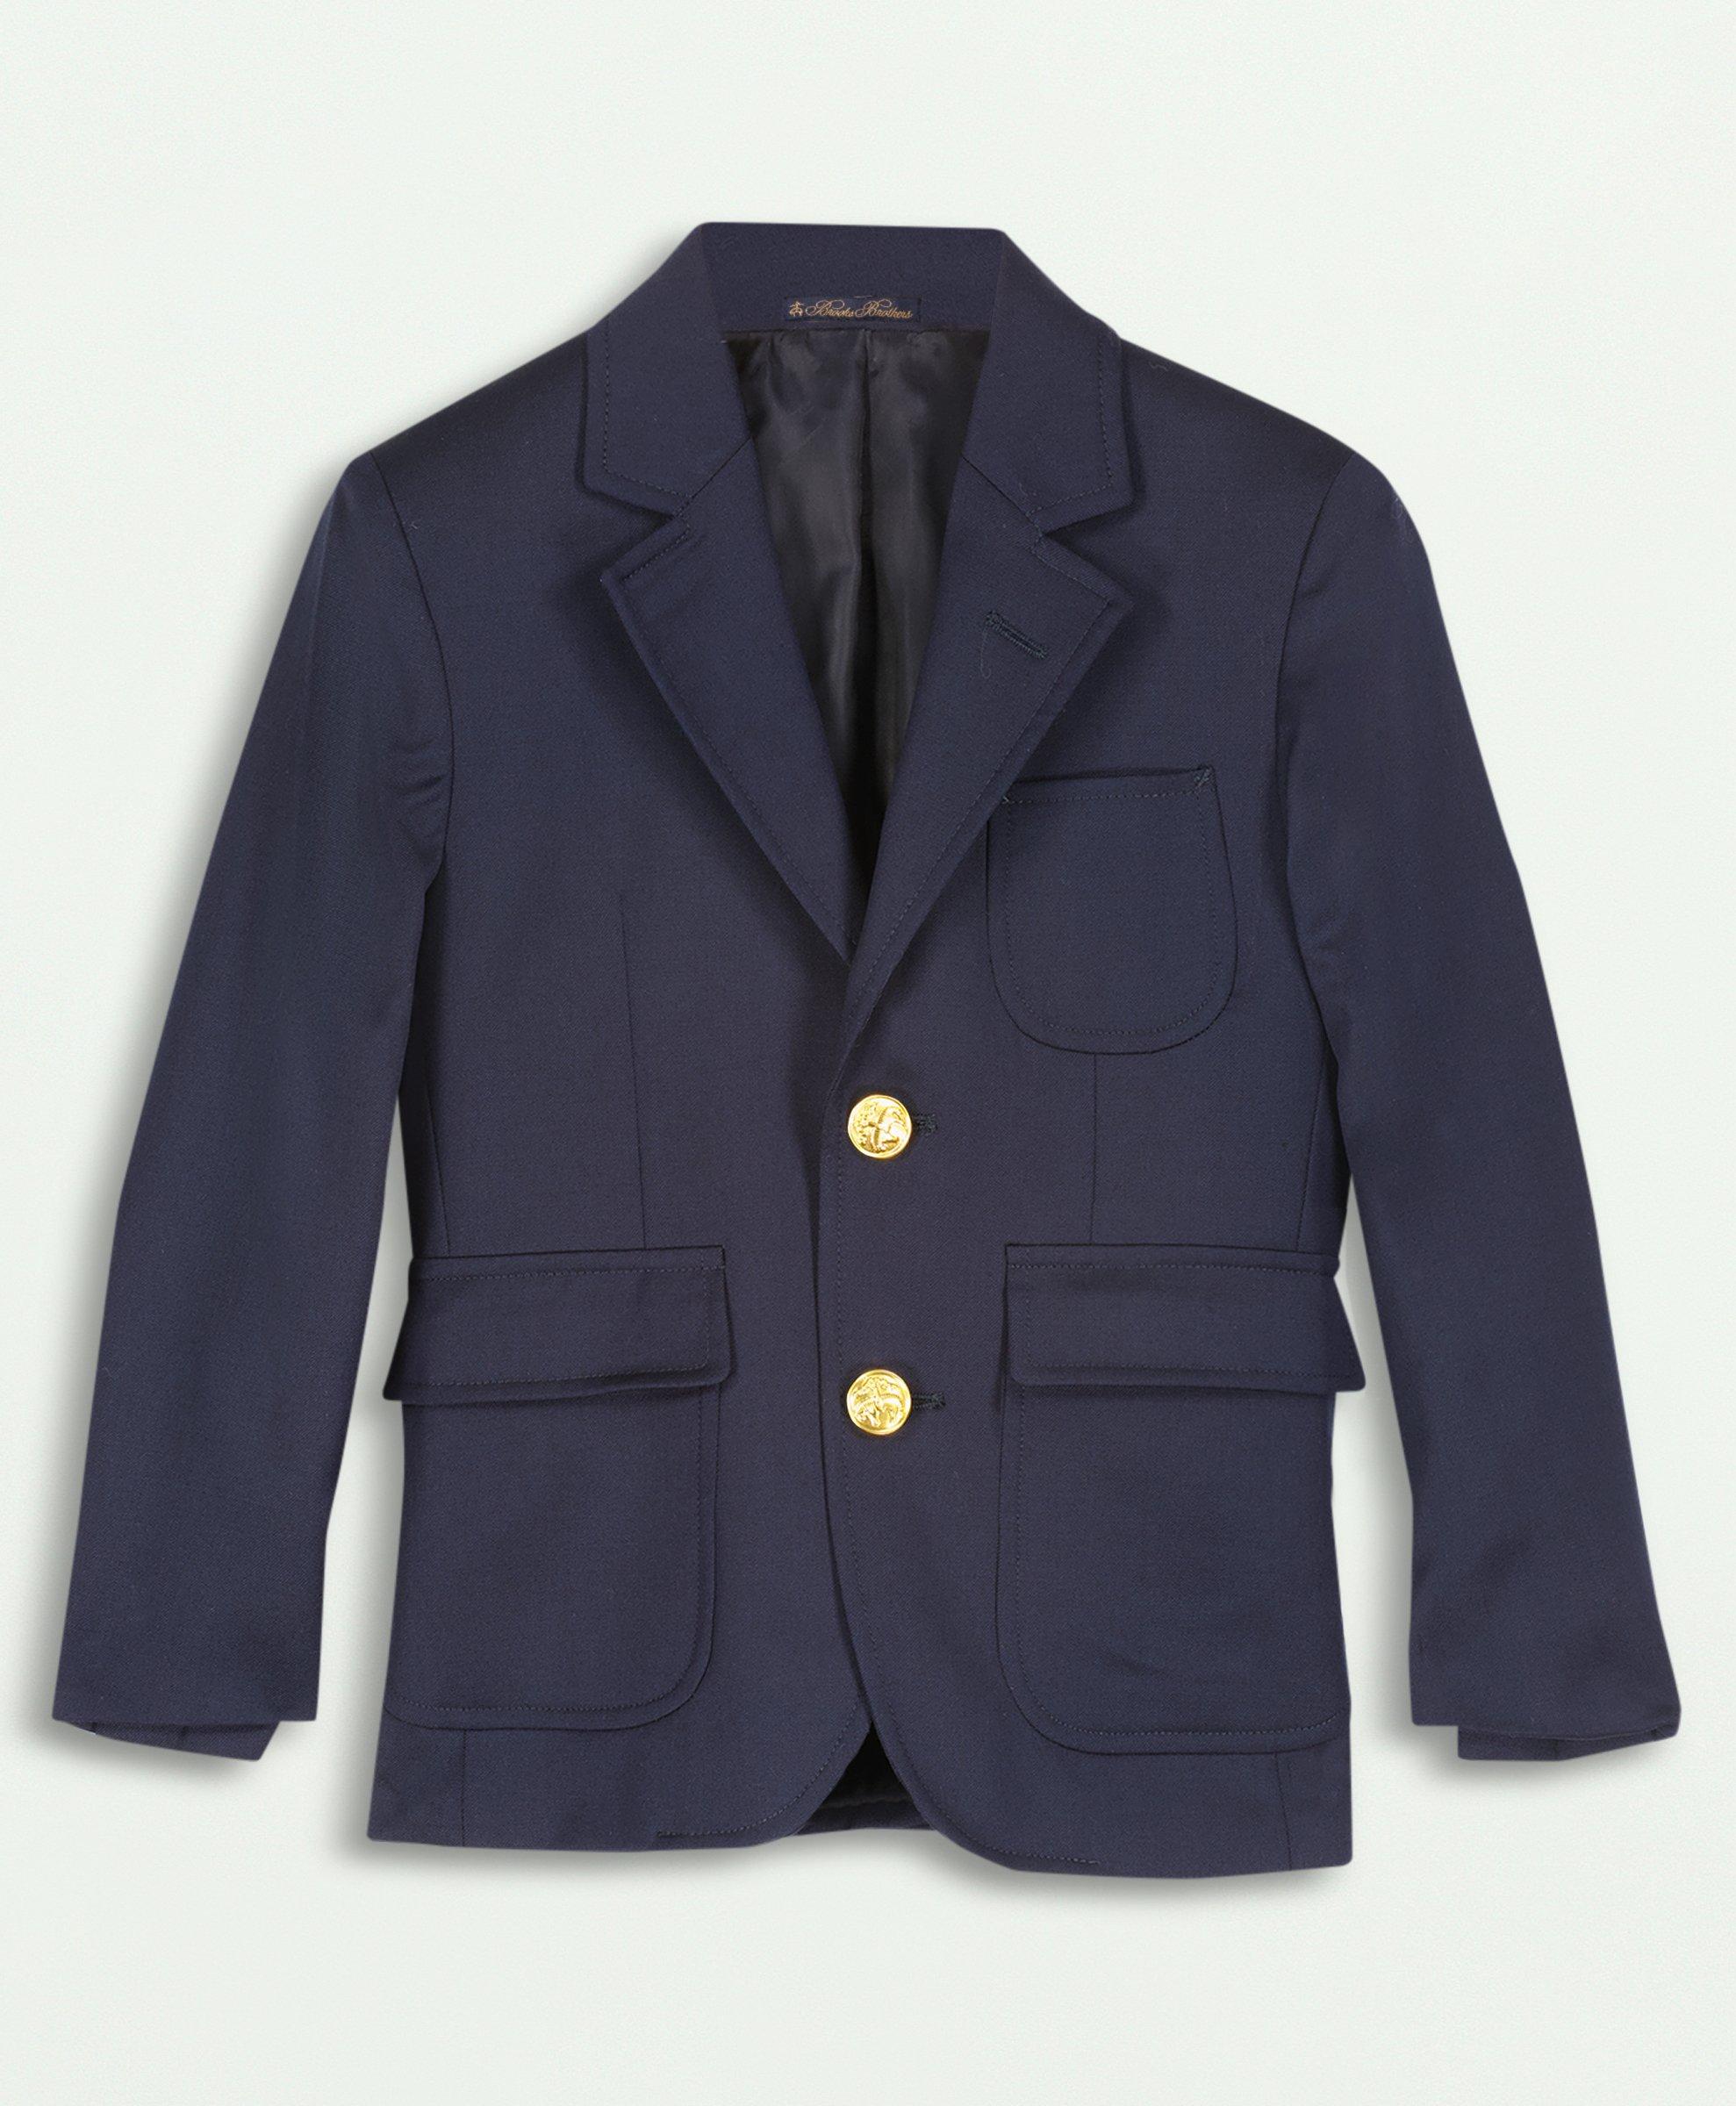 Boys' Suits, Sport Coats & Formal Wear | Brooks Brothers